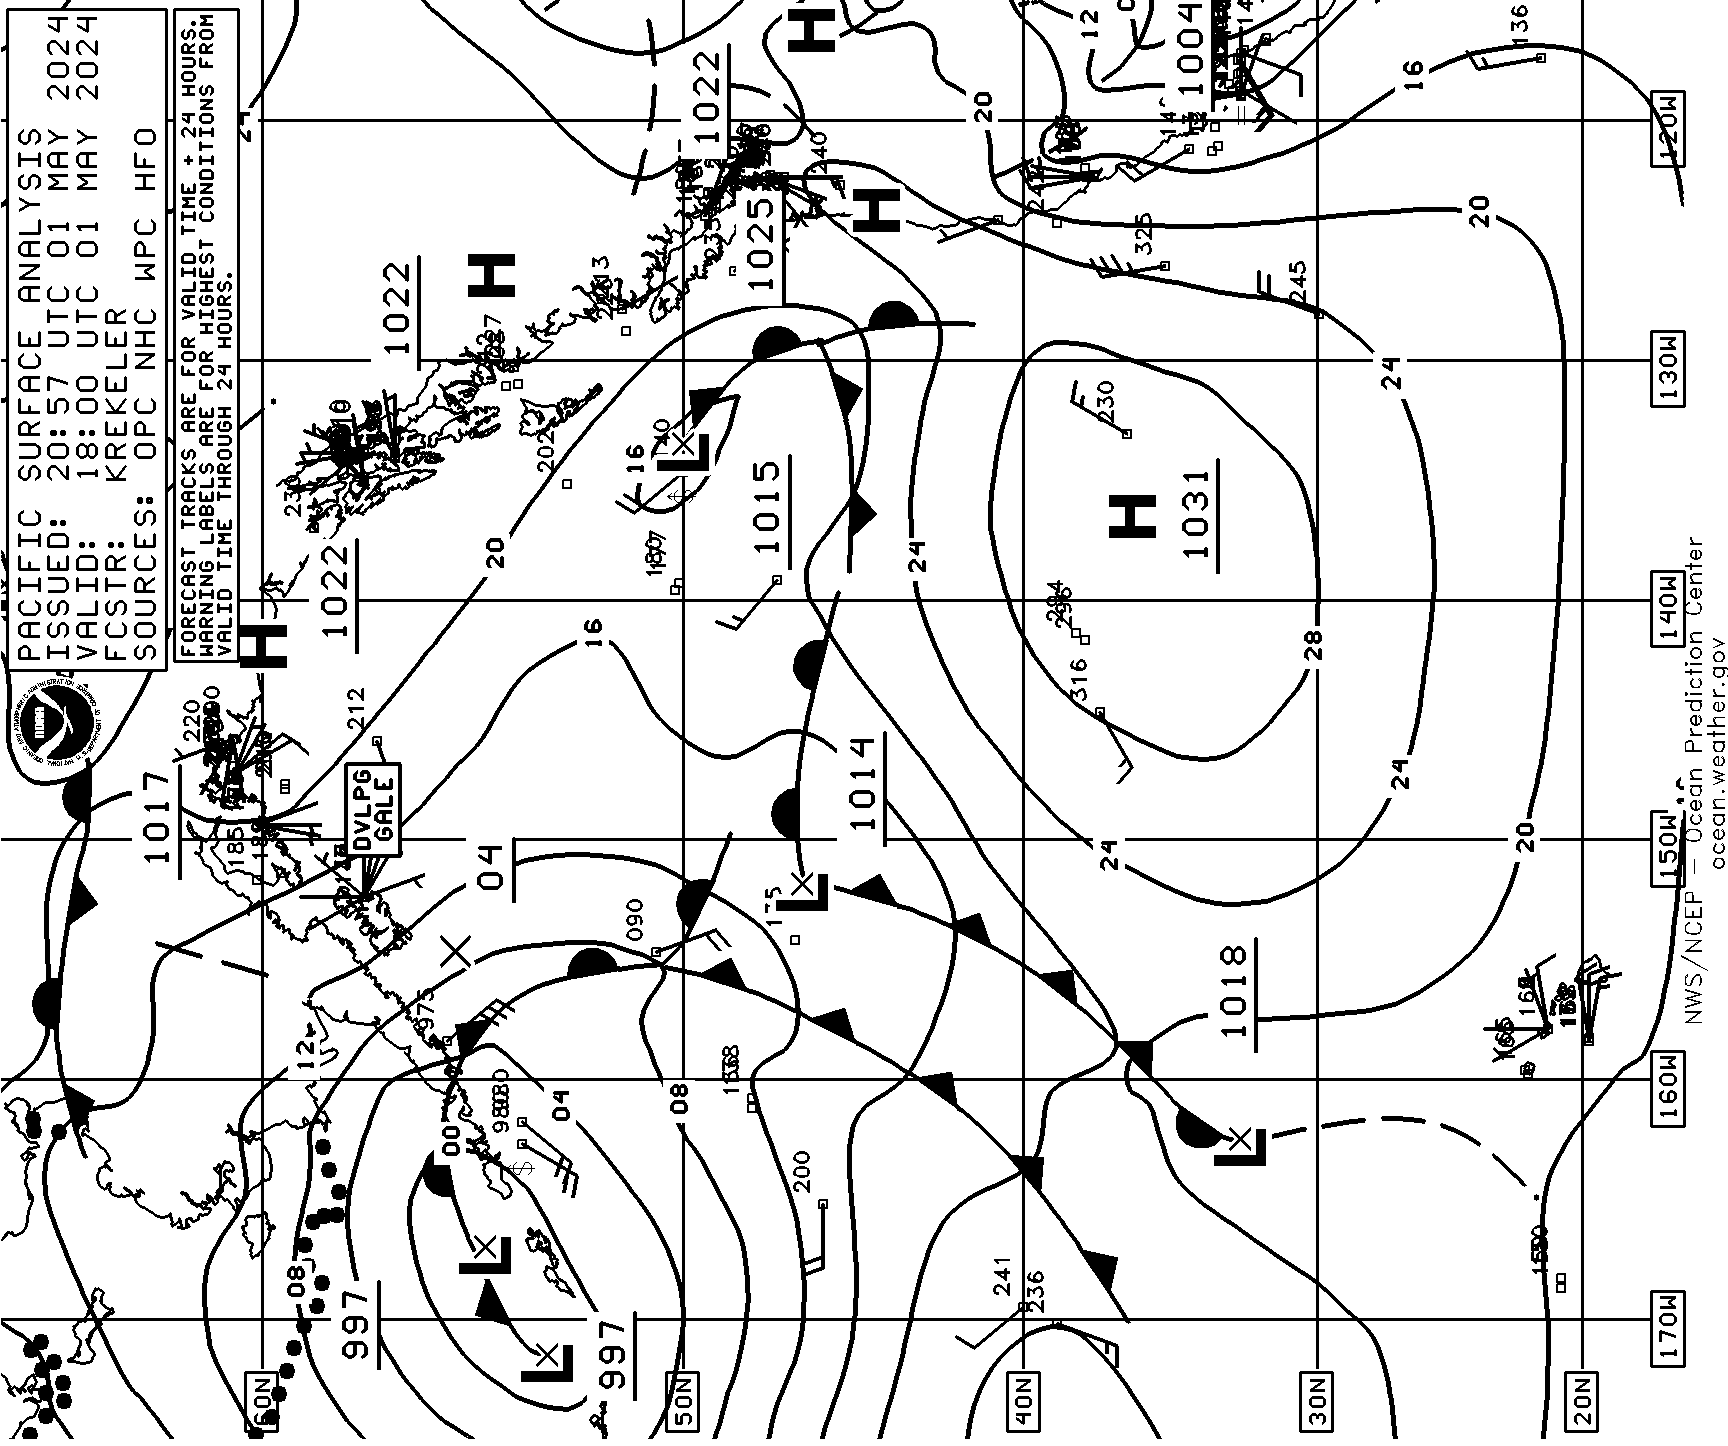 East Pacific surface analysis 